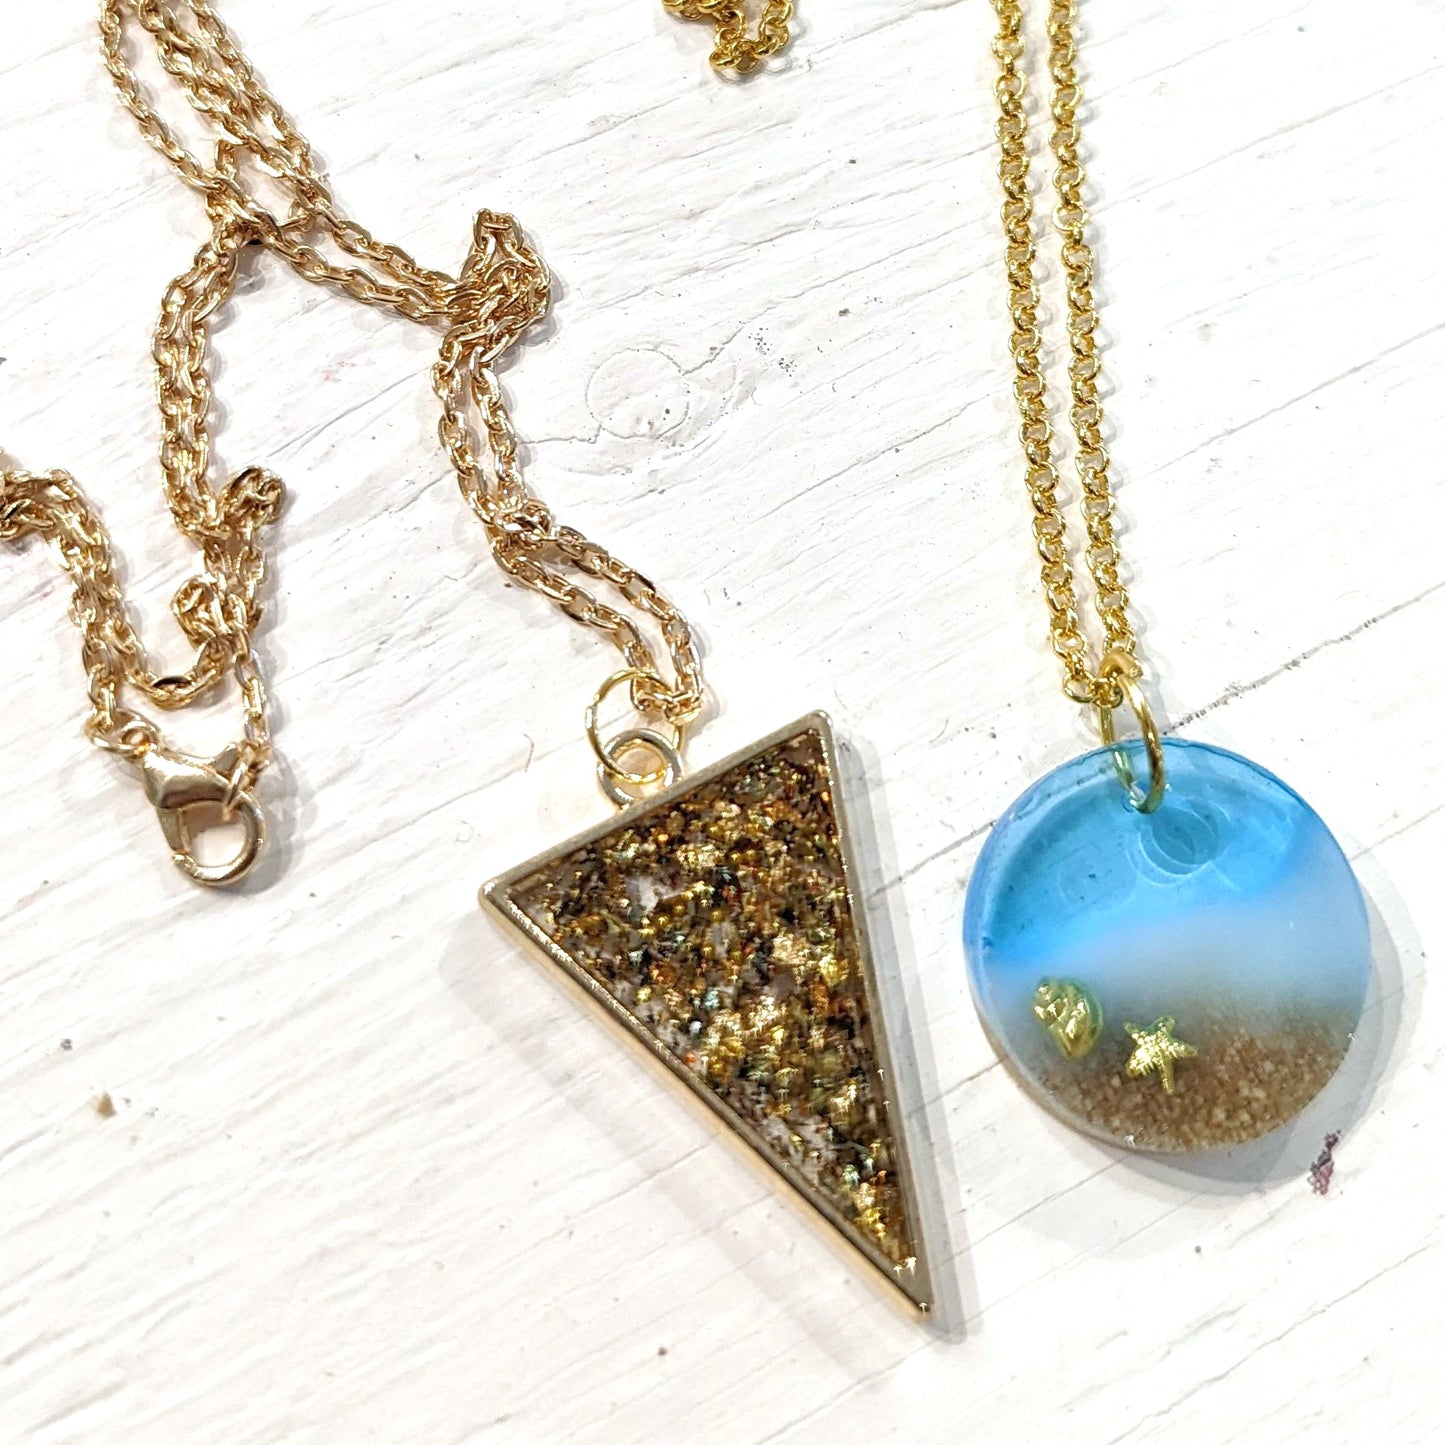 Resin Jewellery Class | Earrings or Necklaces